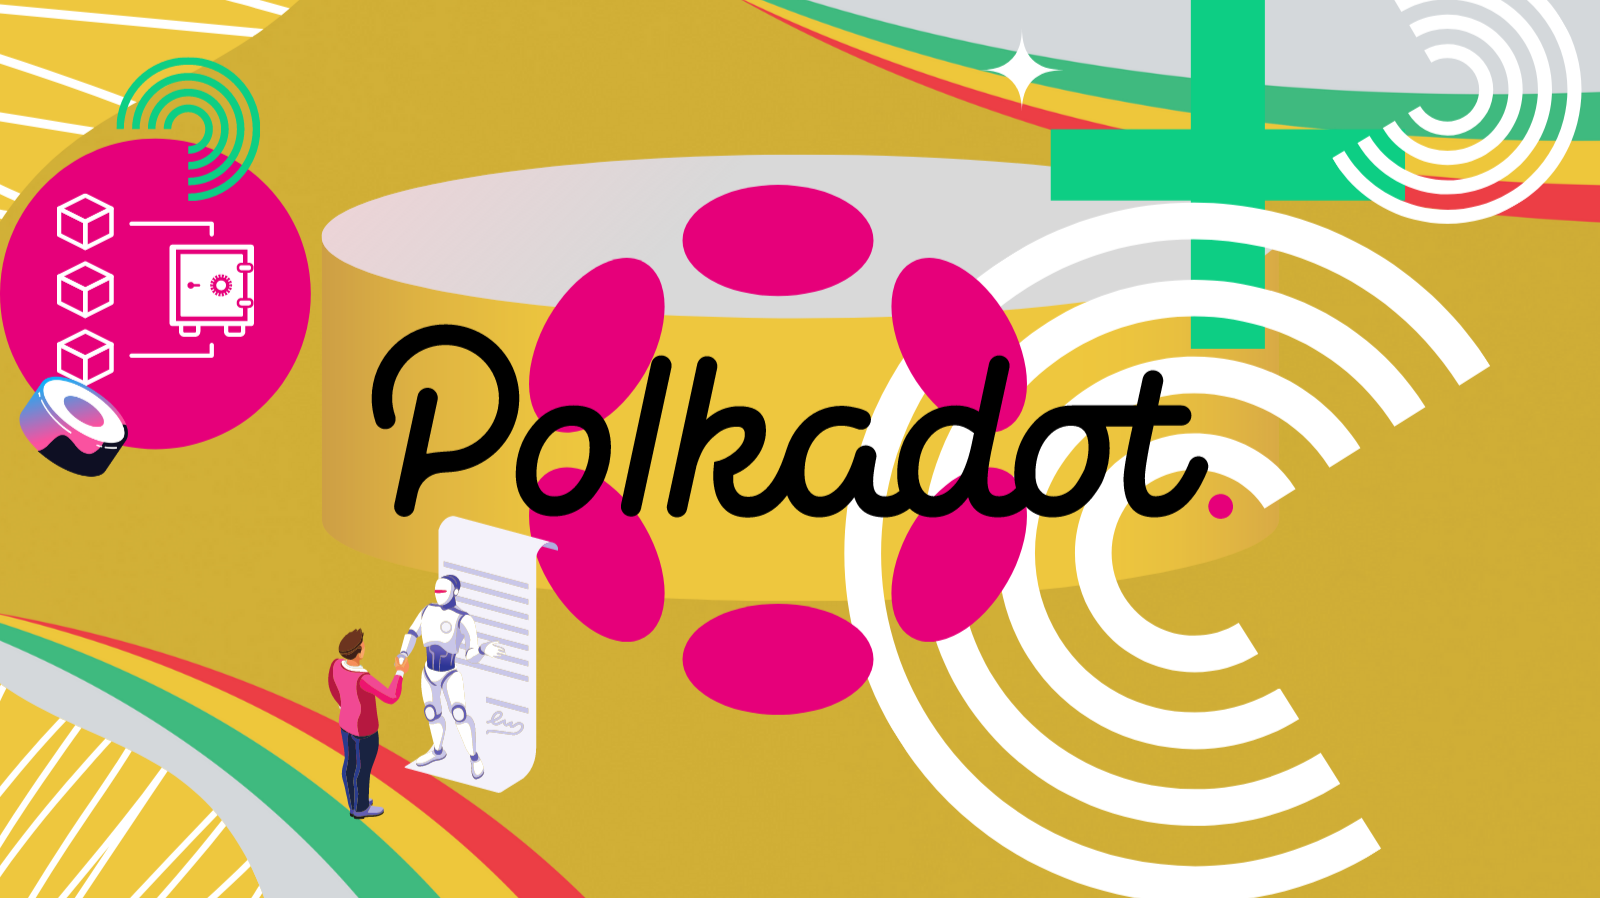 Polkadot Price Drops On Chart With Resistance At $6.80, What’s Next?